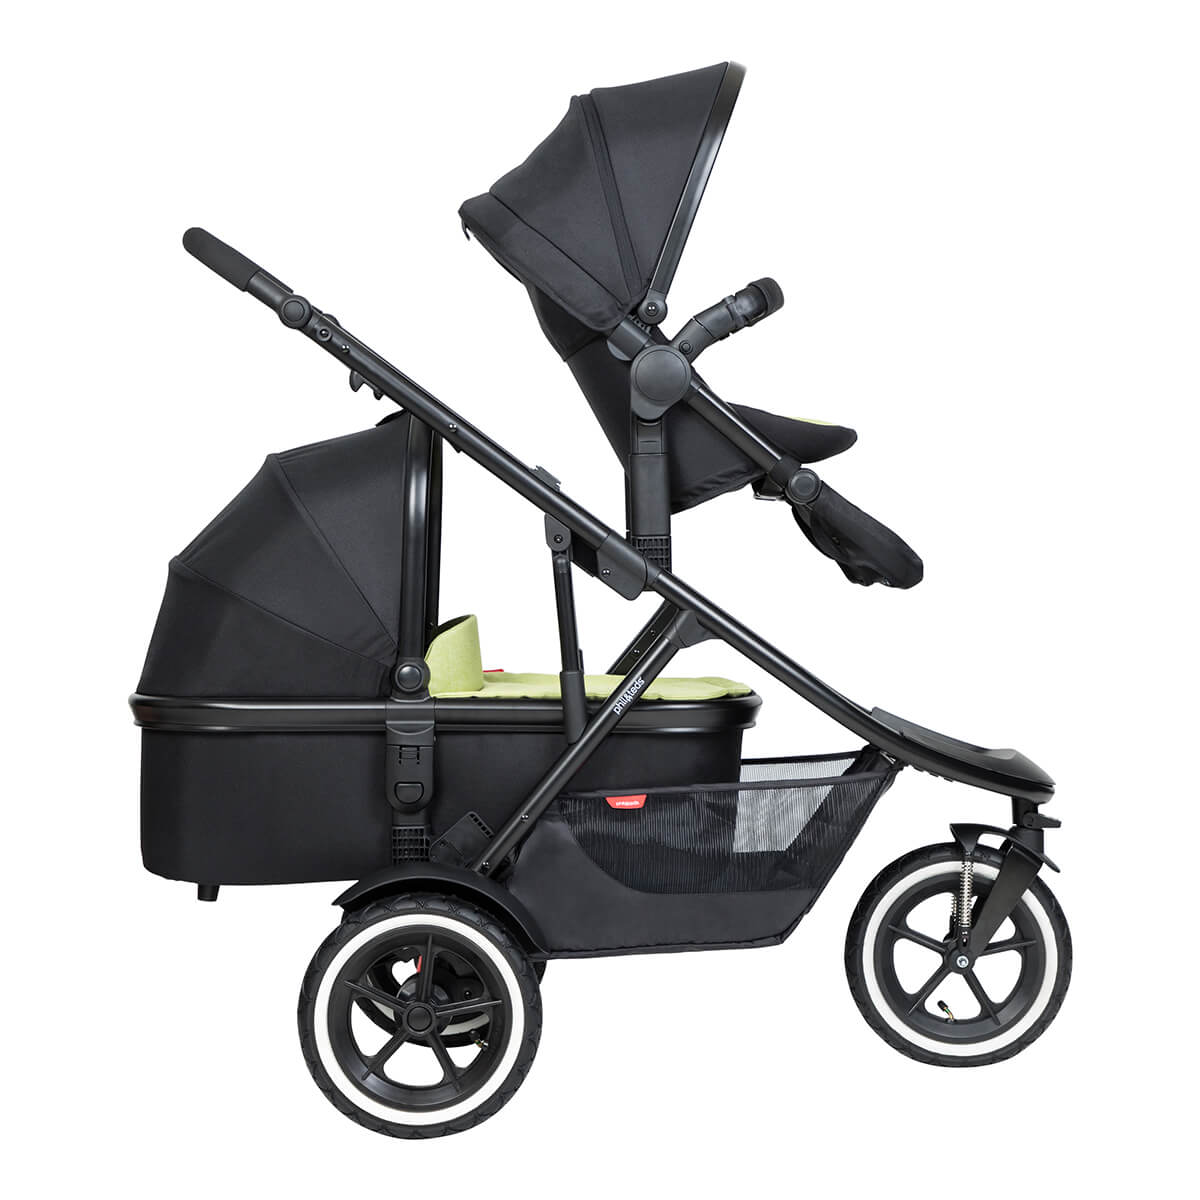 https://cdn.accentuate.io/7266900738101/19118870659125/philteds-sport-buggy-with-double-kit-extended-clip-and-snug-carrycot-side-view-v1700693465477.jpg?1200x1200